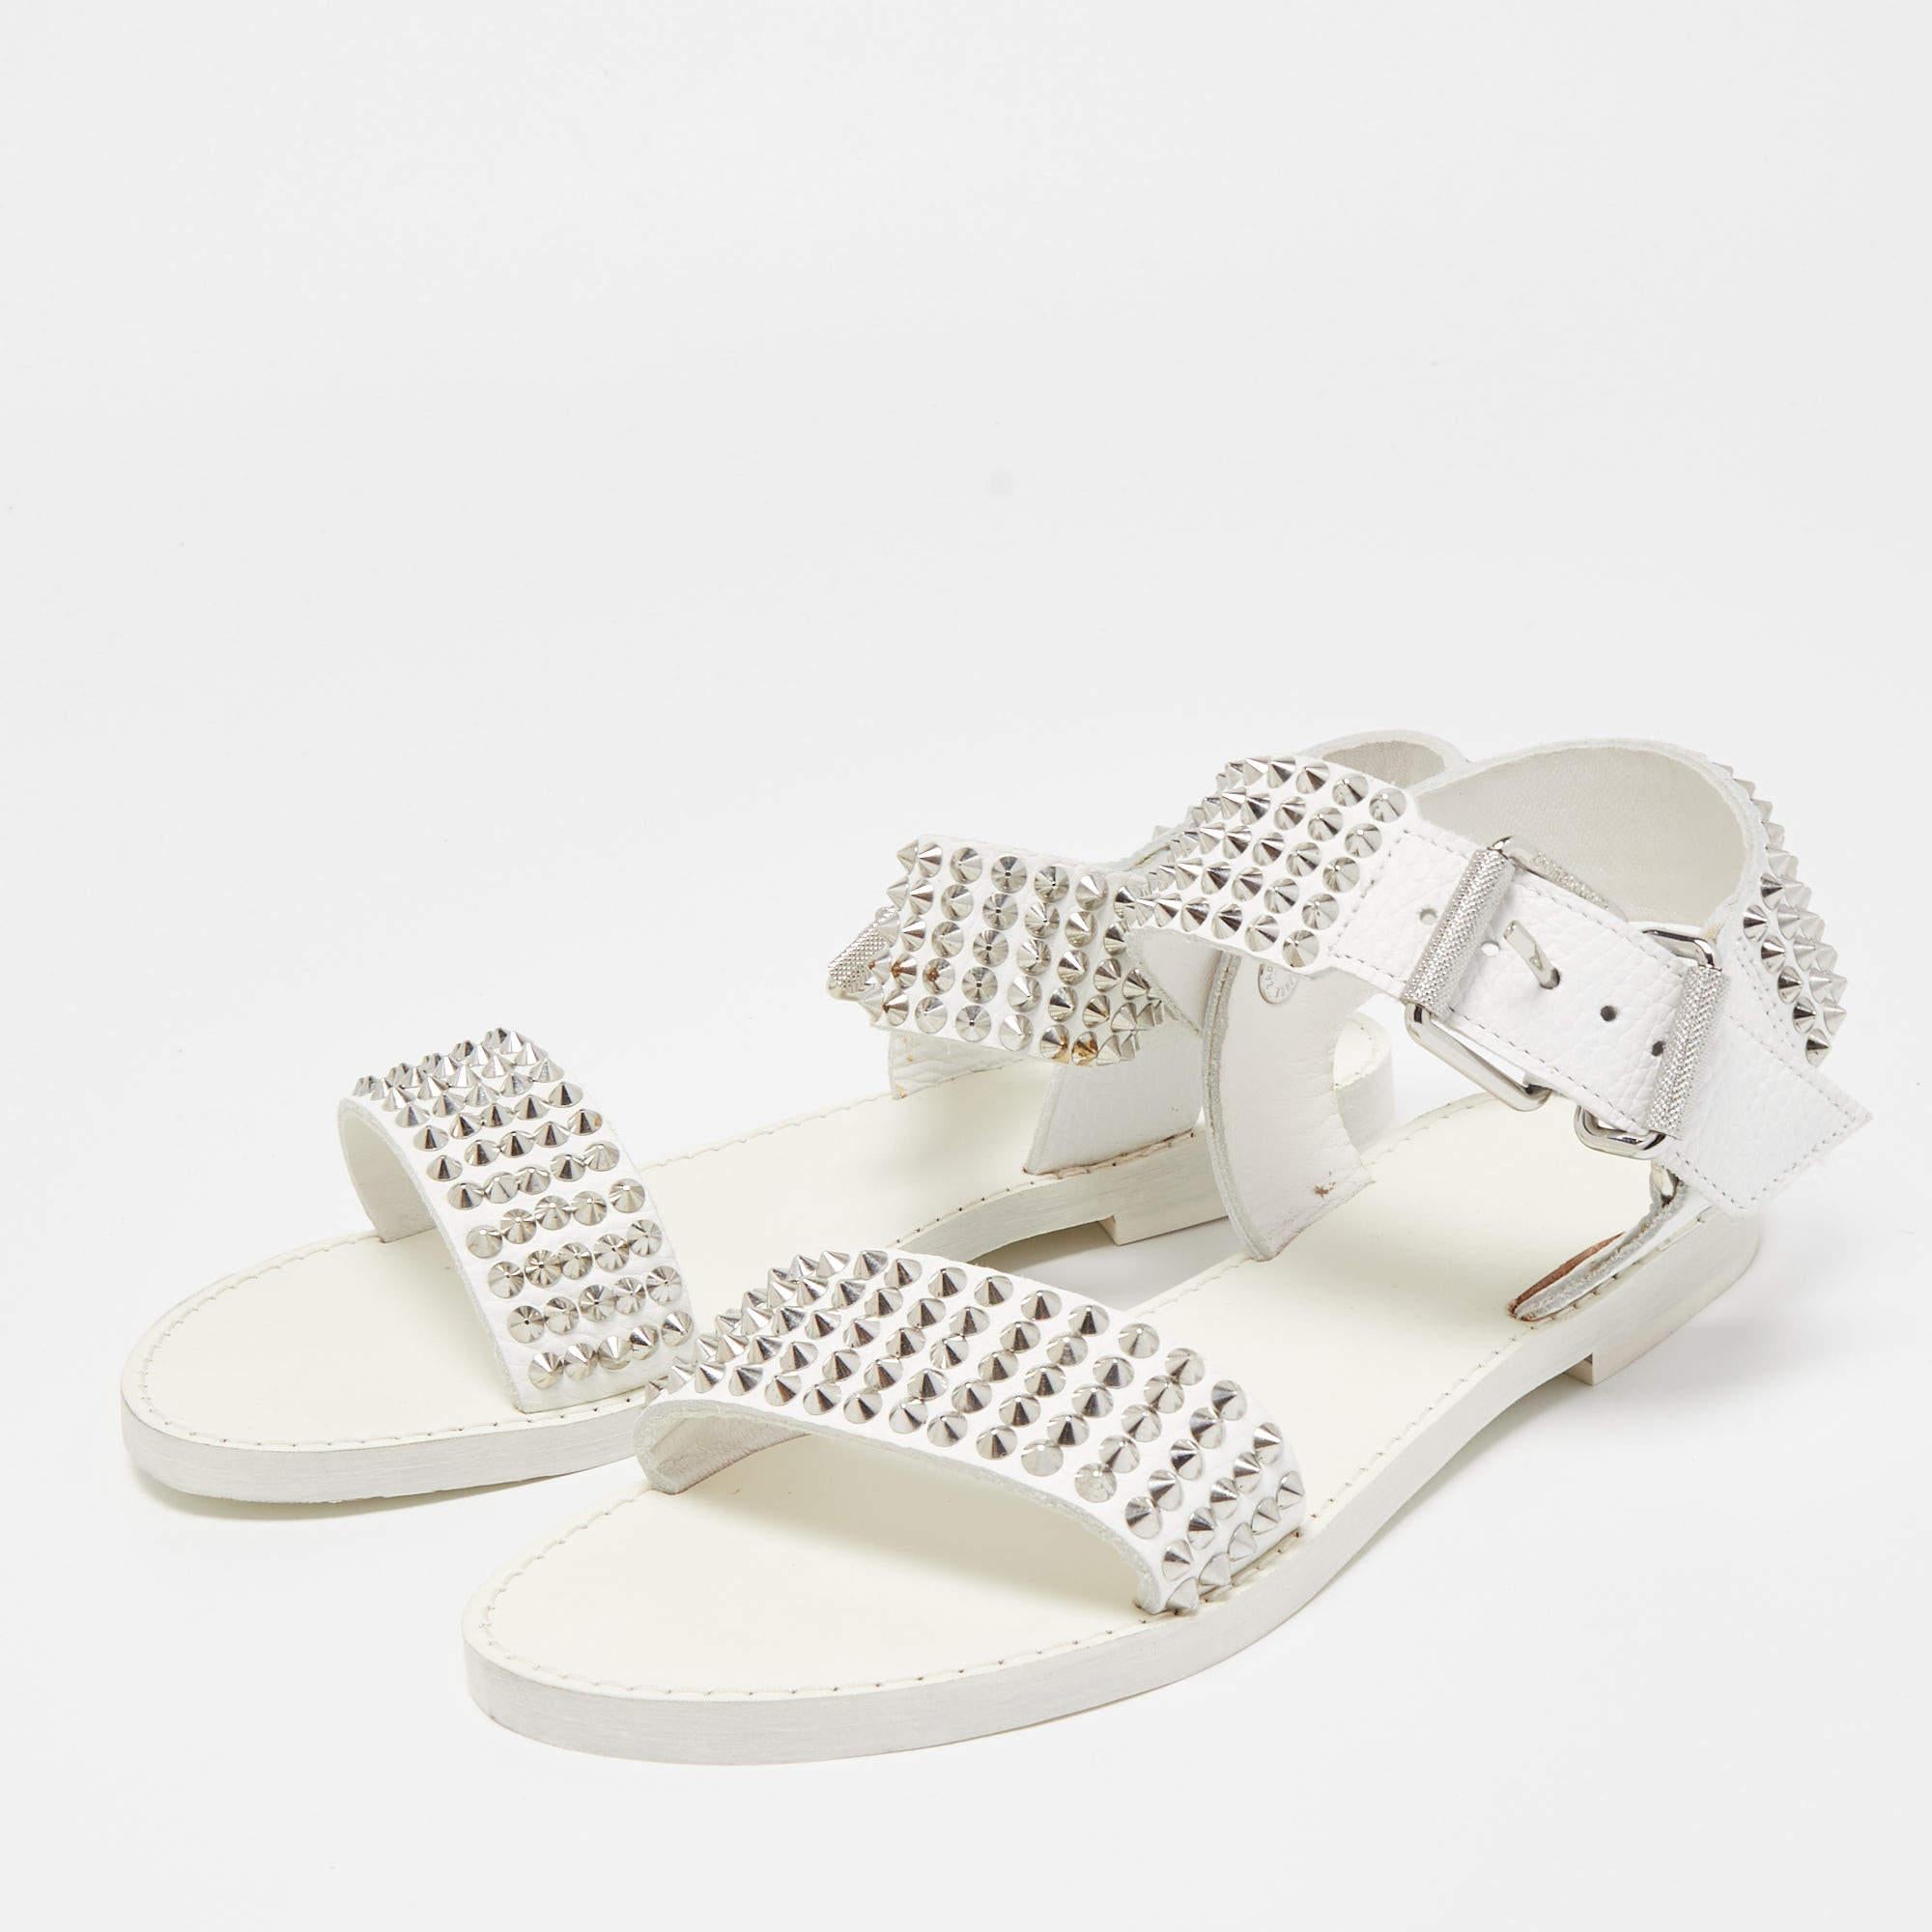 Zadig & Voltaire White Leather Ankle Strap Spiked Sandals Size 36 For Sale 2